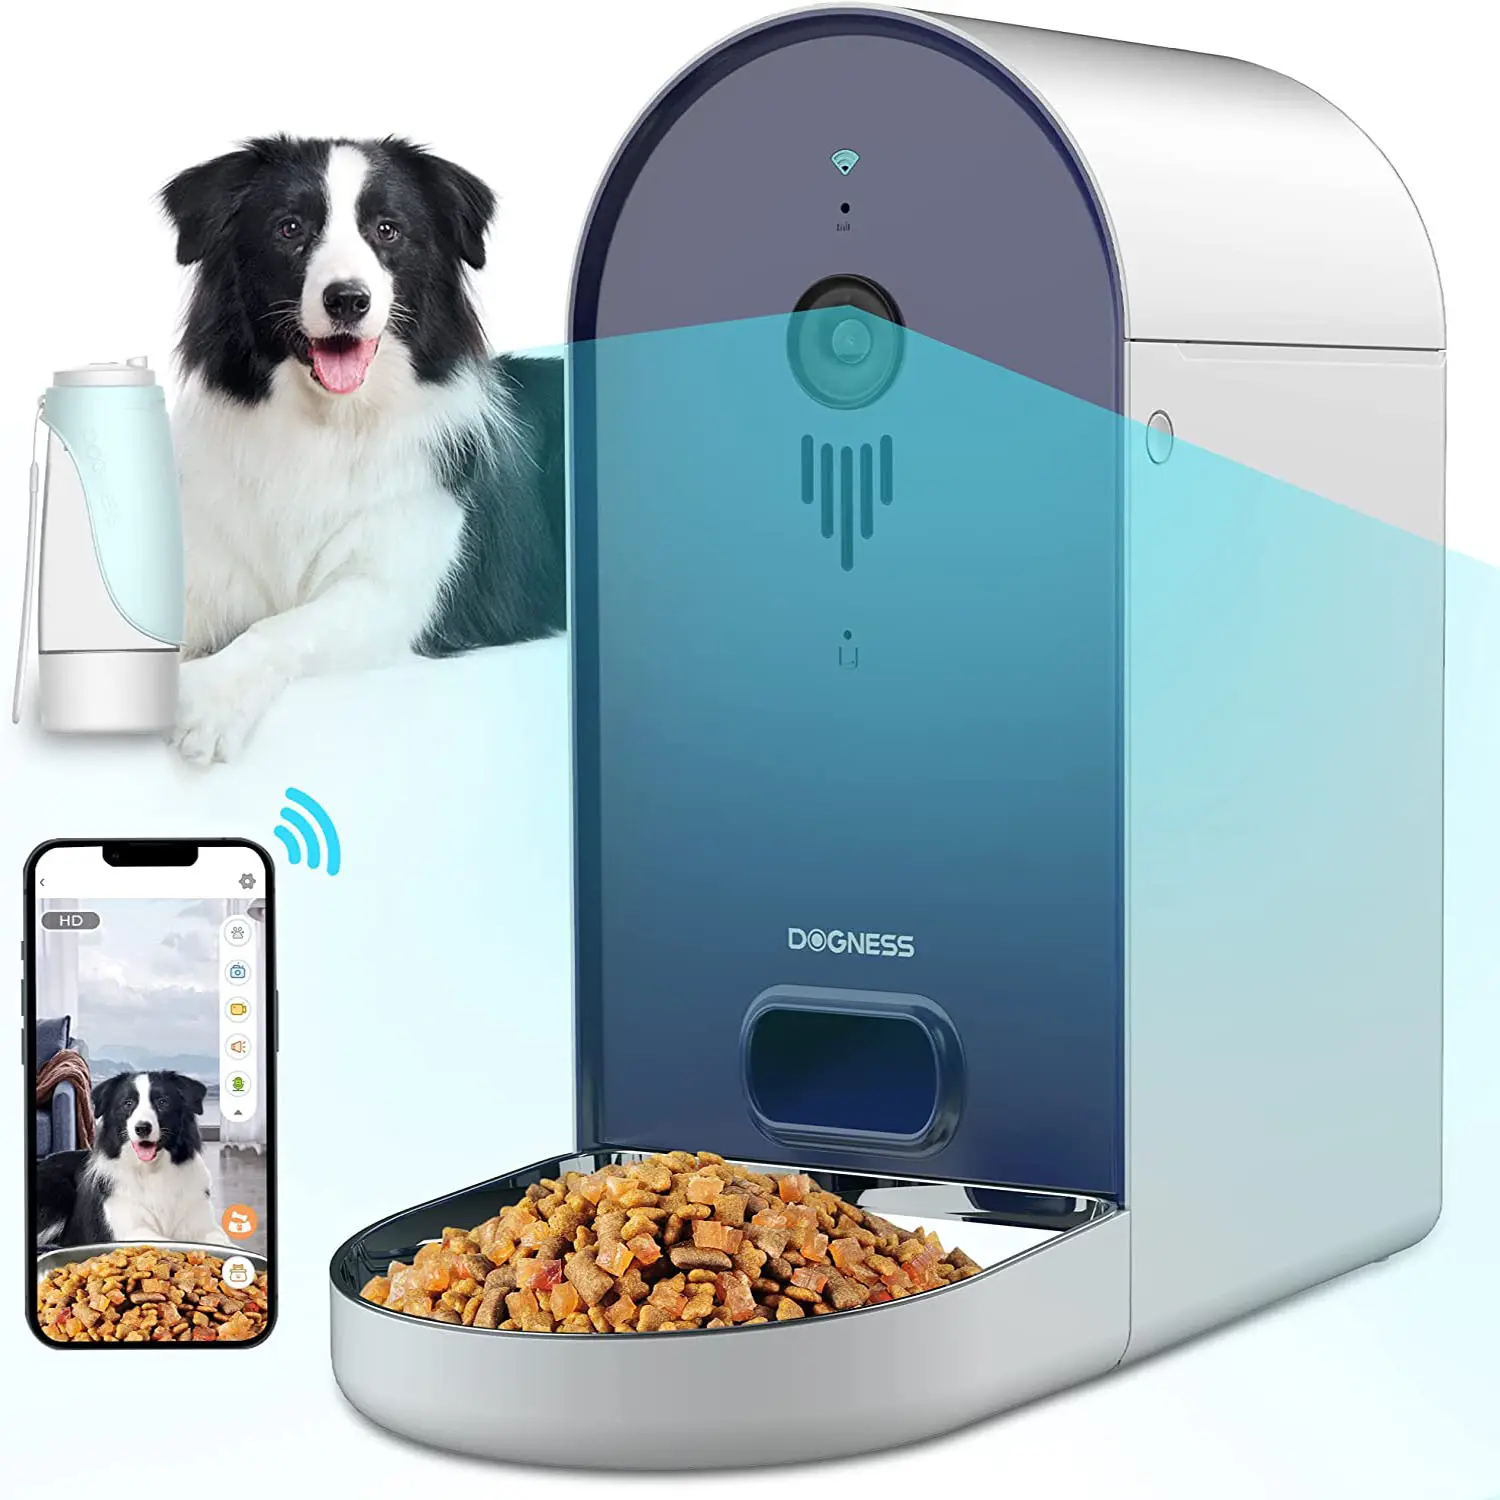 Dogness Smart Automatic Pet Feeder Dog Cat Pet Feeder Food Dispenser BSCI Bowls for Dogs Modern Automatic Feeders Waters 6L